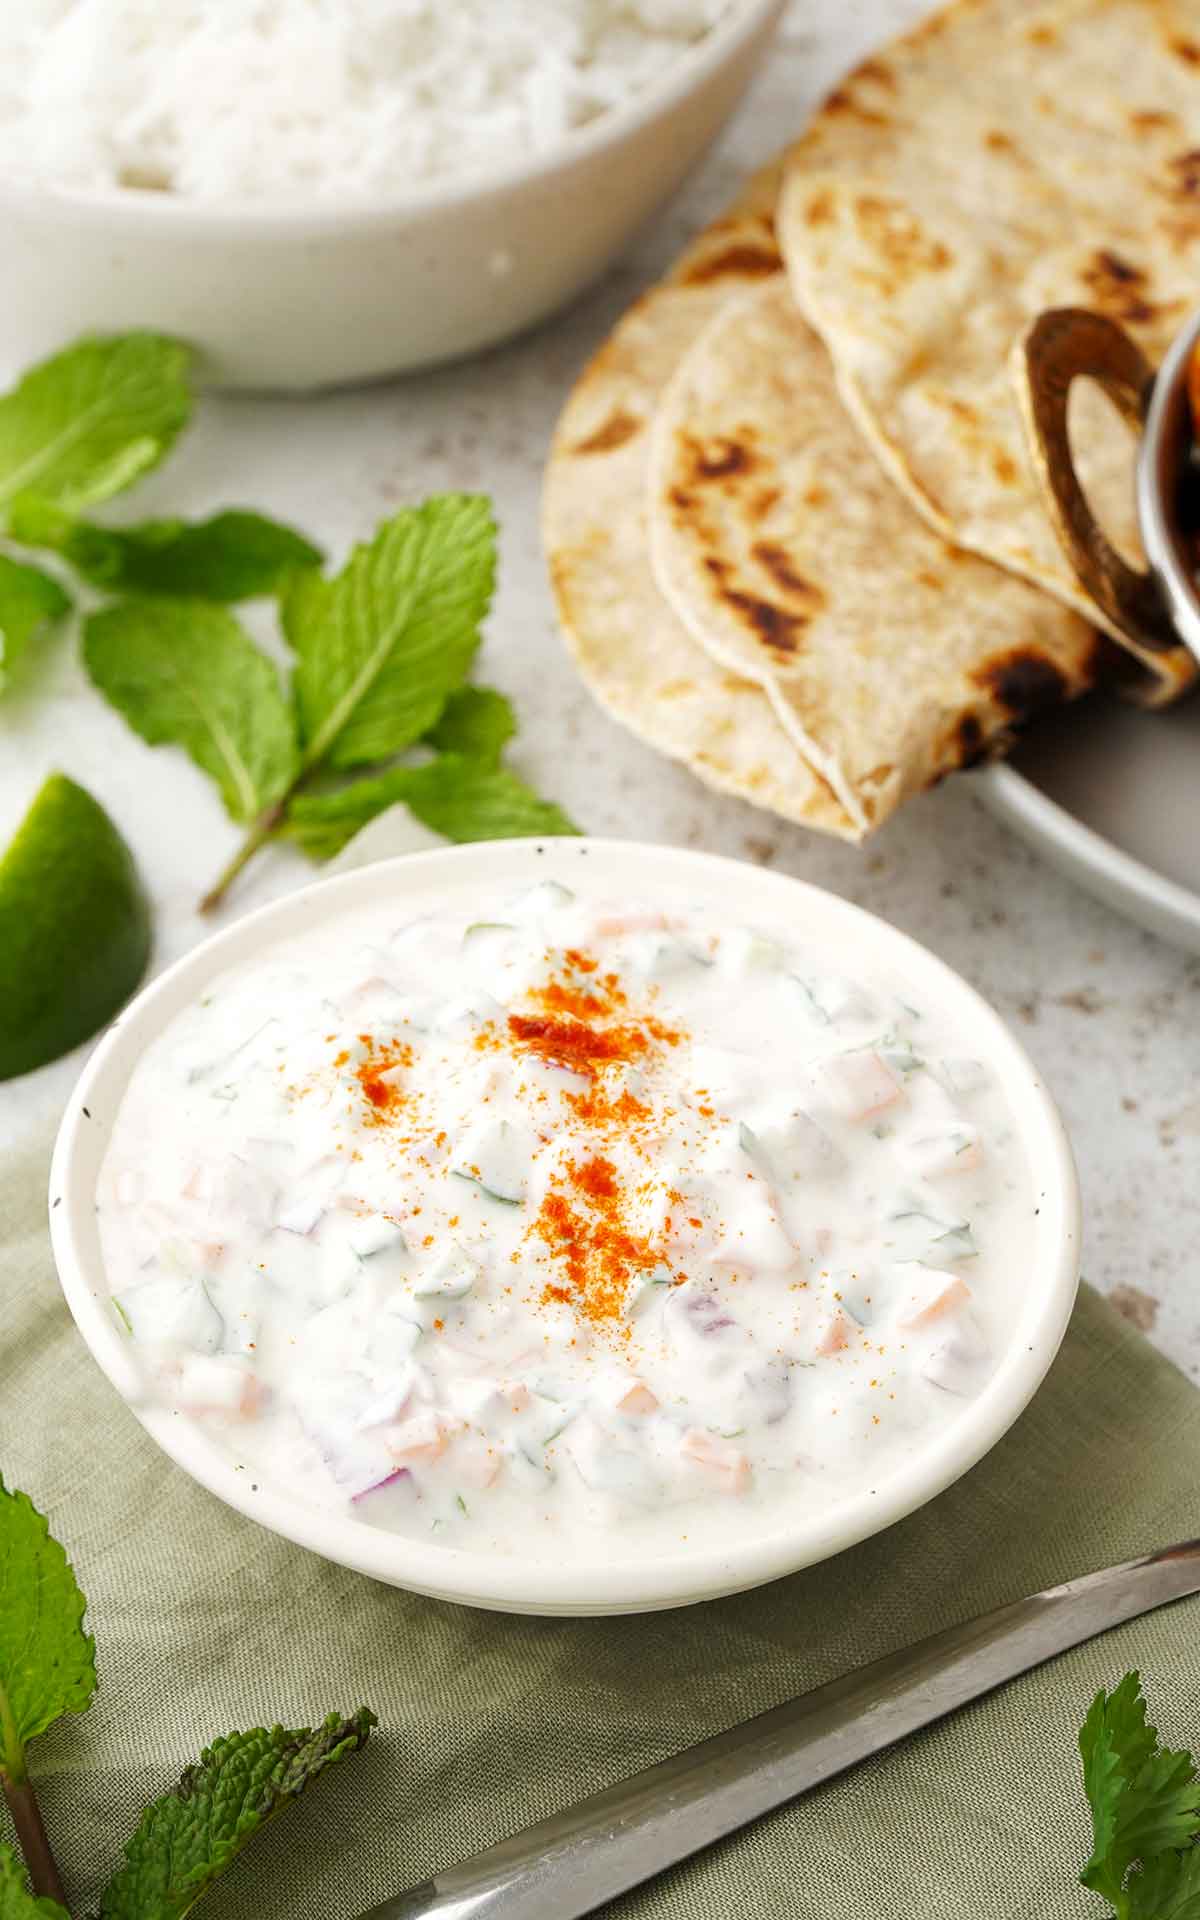 A white bowl containing Indian yoghurt sauce with vegetables and garnished with ground spices. Naan bread and mint leaves on the side.